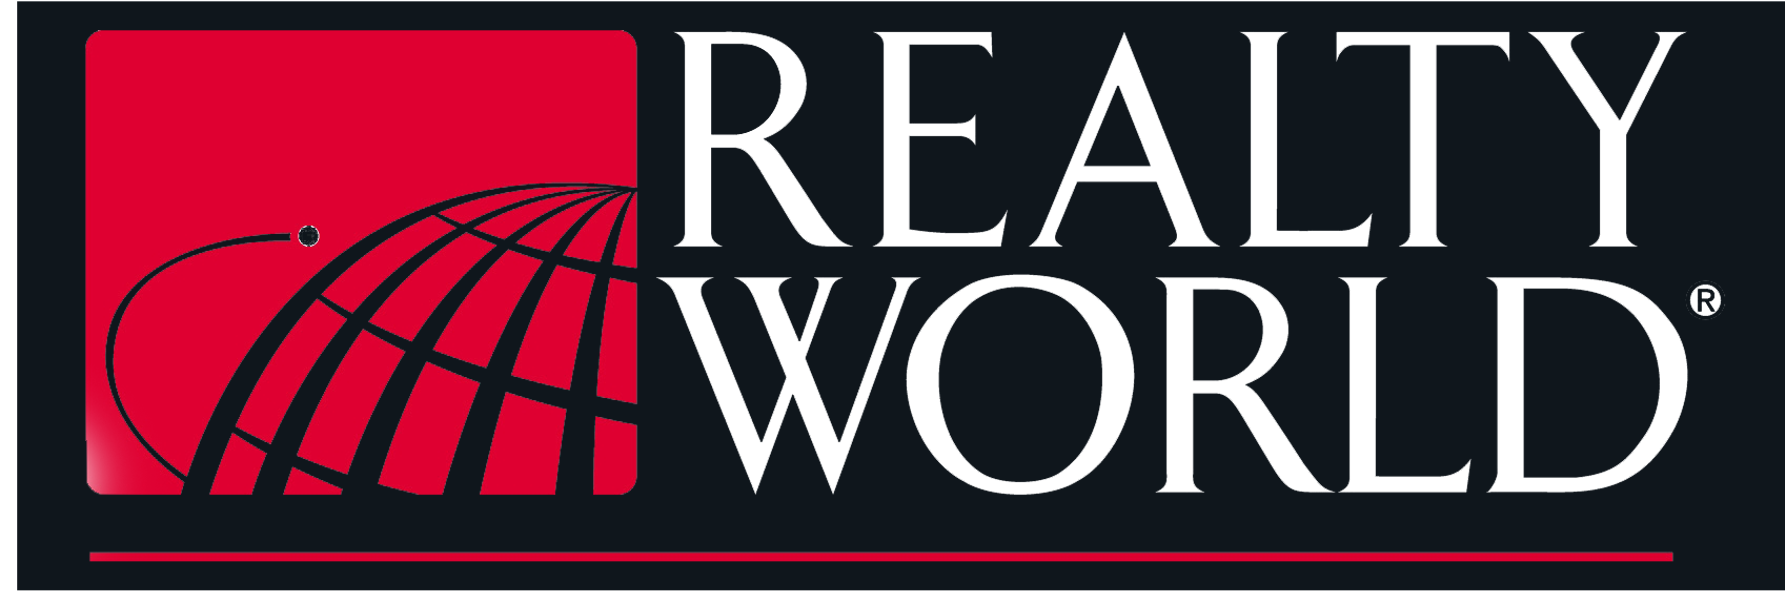 Realty World Cosser and Associates